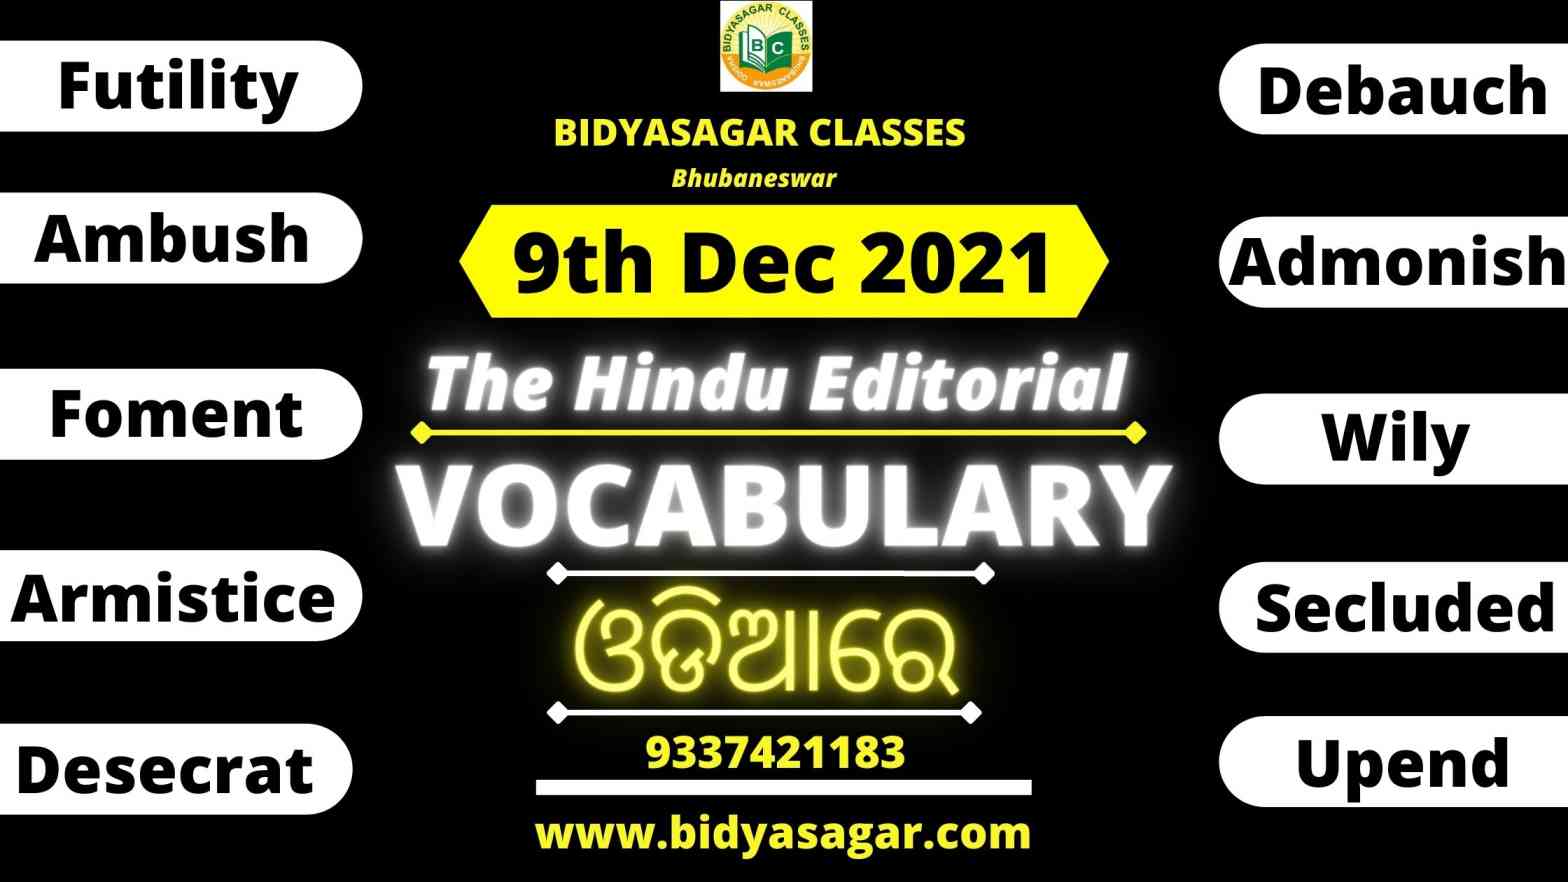 The Hindu Editorial Vocabulary of 9th December 2021